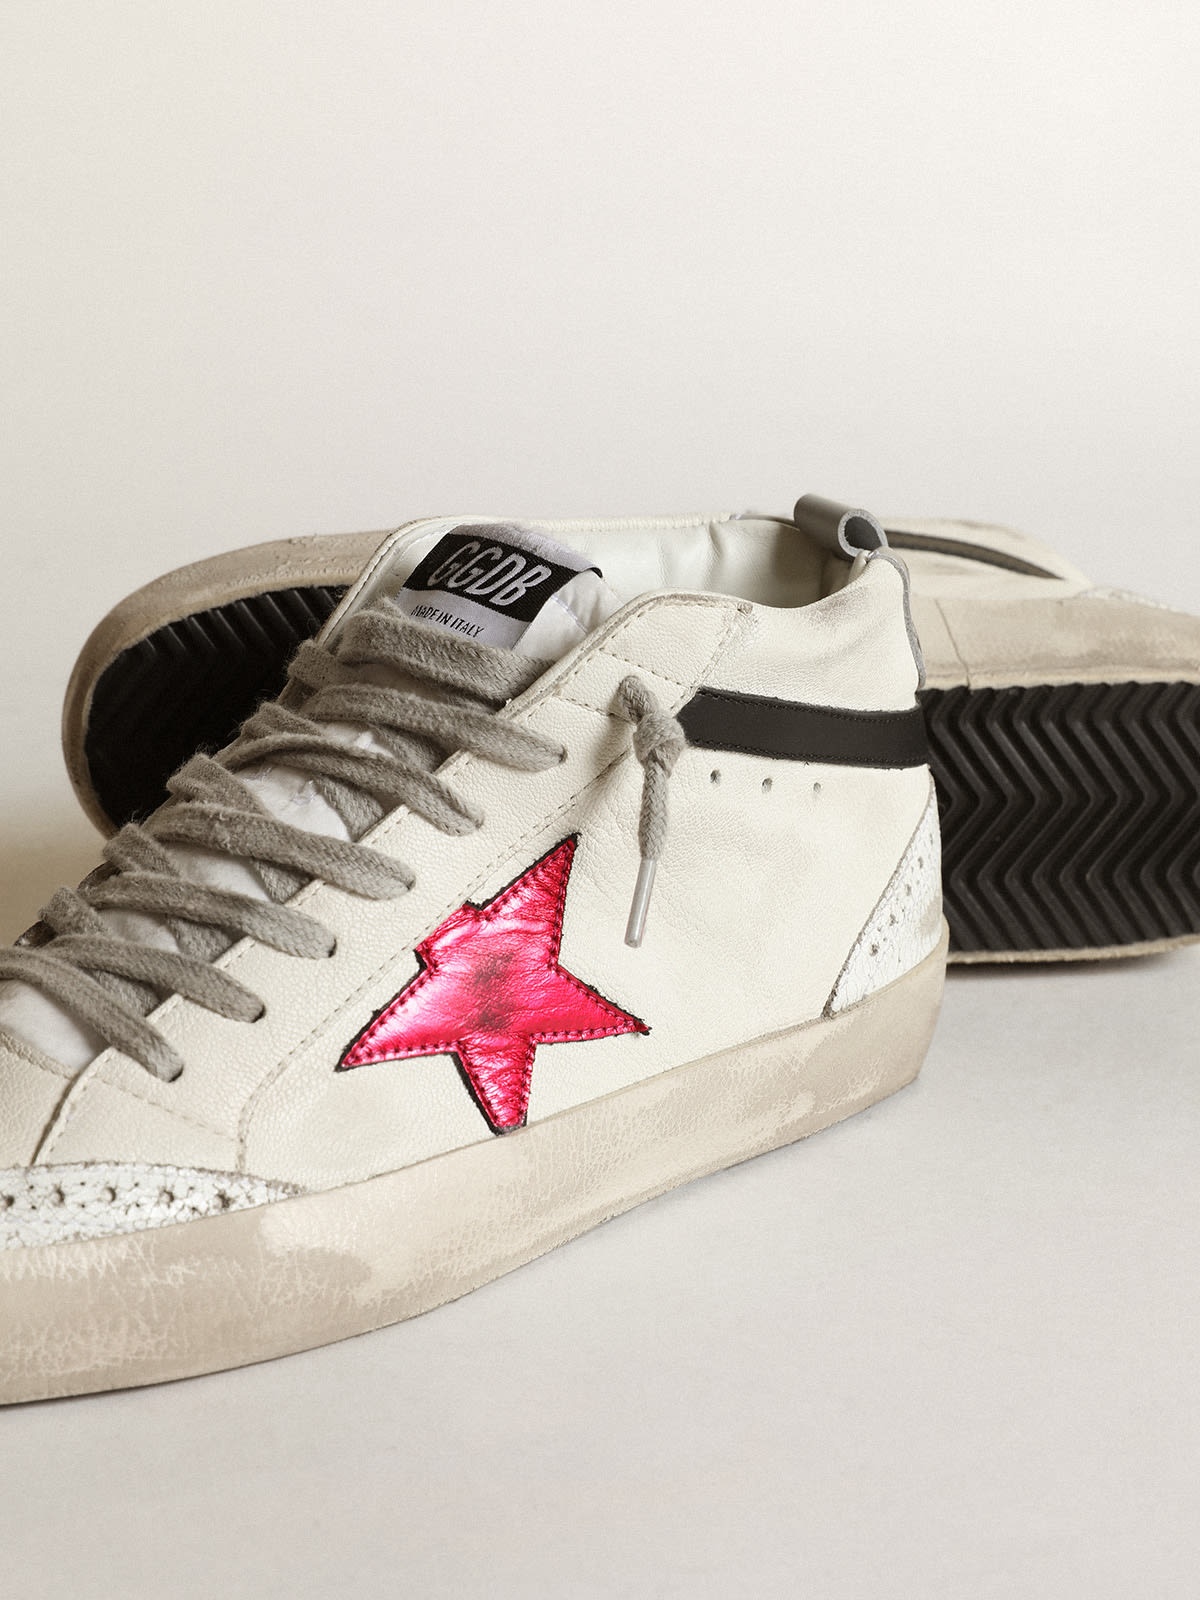 Mid Star with a pink laminated leather star and black flash - 4